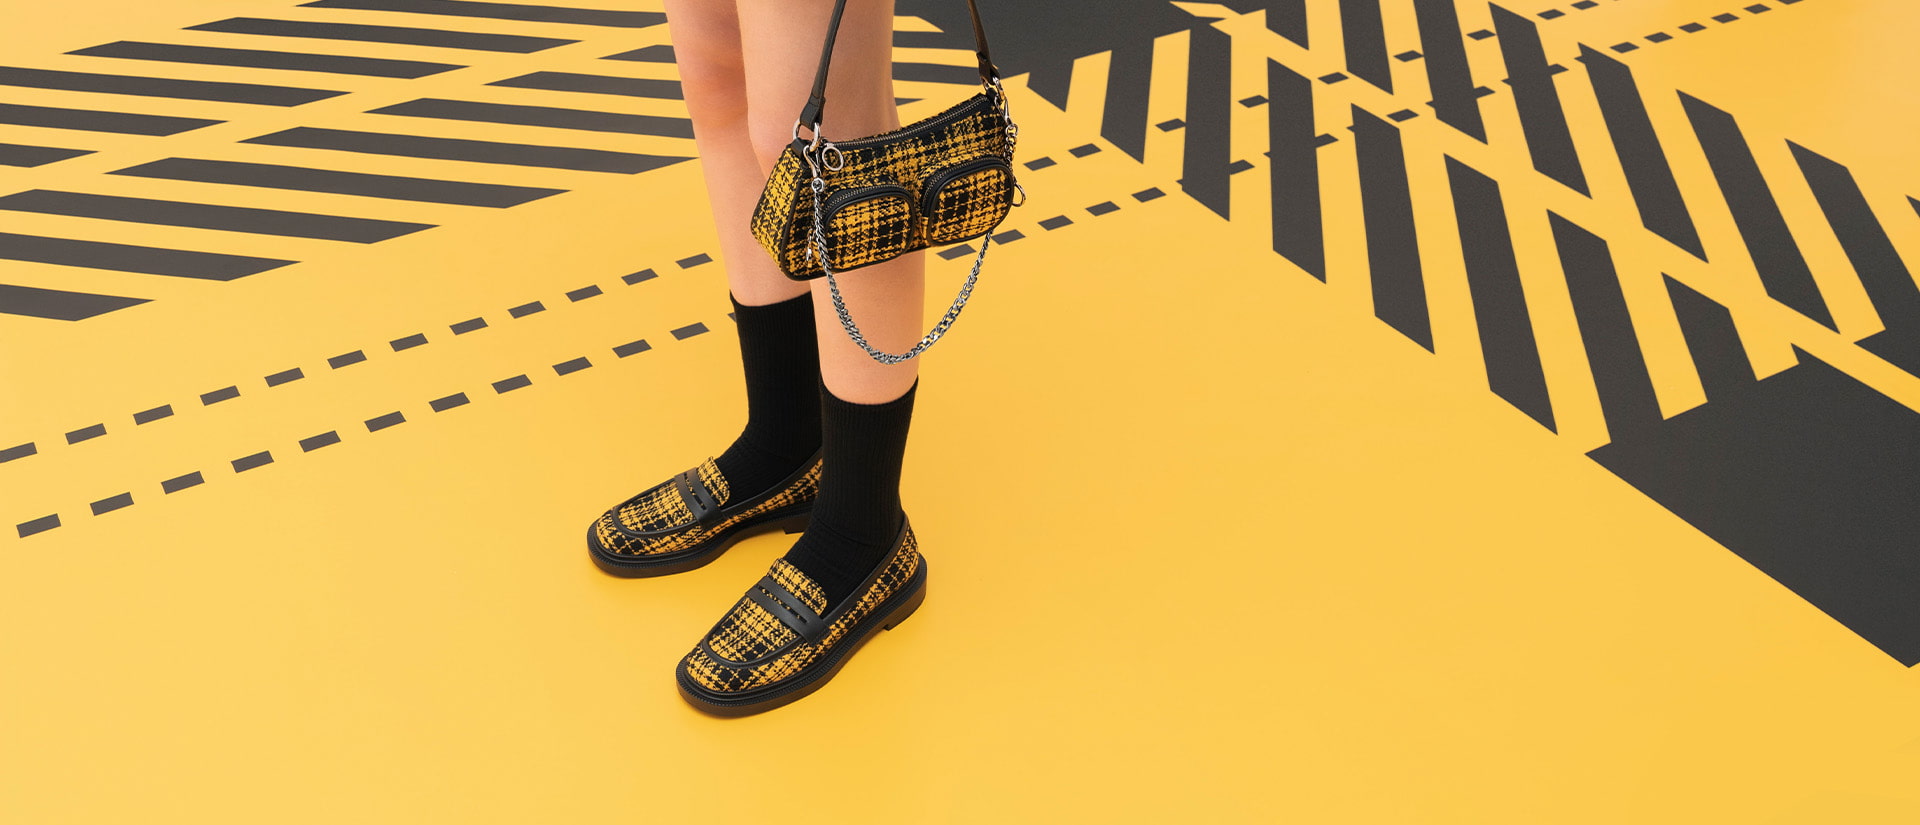 Checkered Penny Loafers in yellow and حقيبة كتف منسوجة بطبعة كاروهات in multi - CHARLES & KEITH